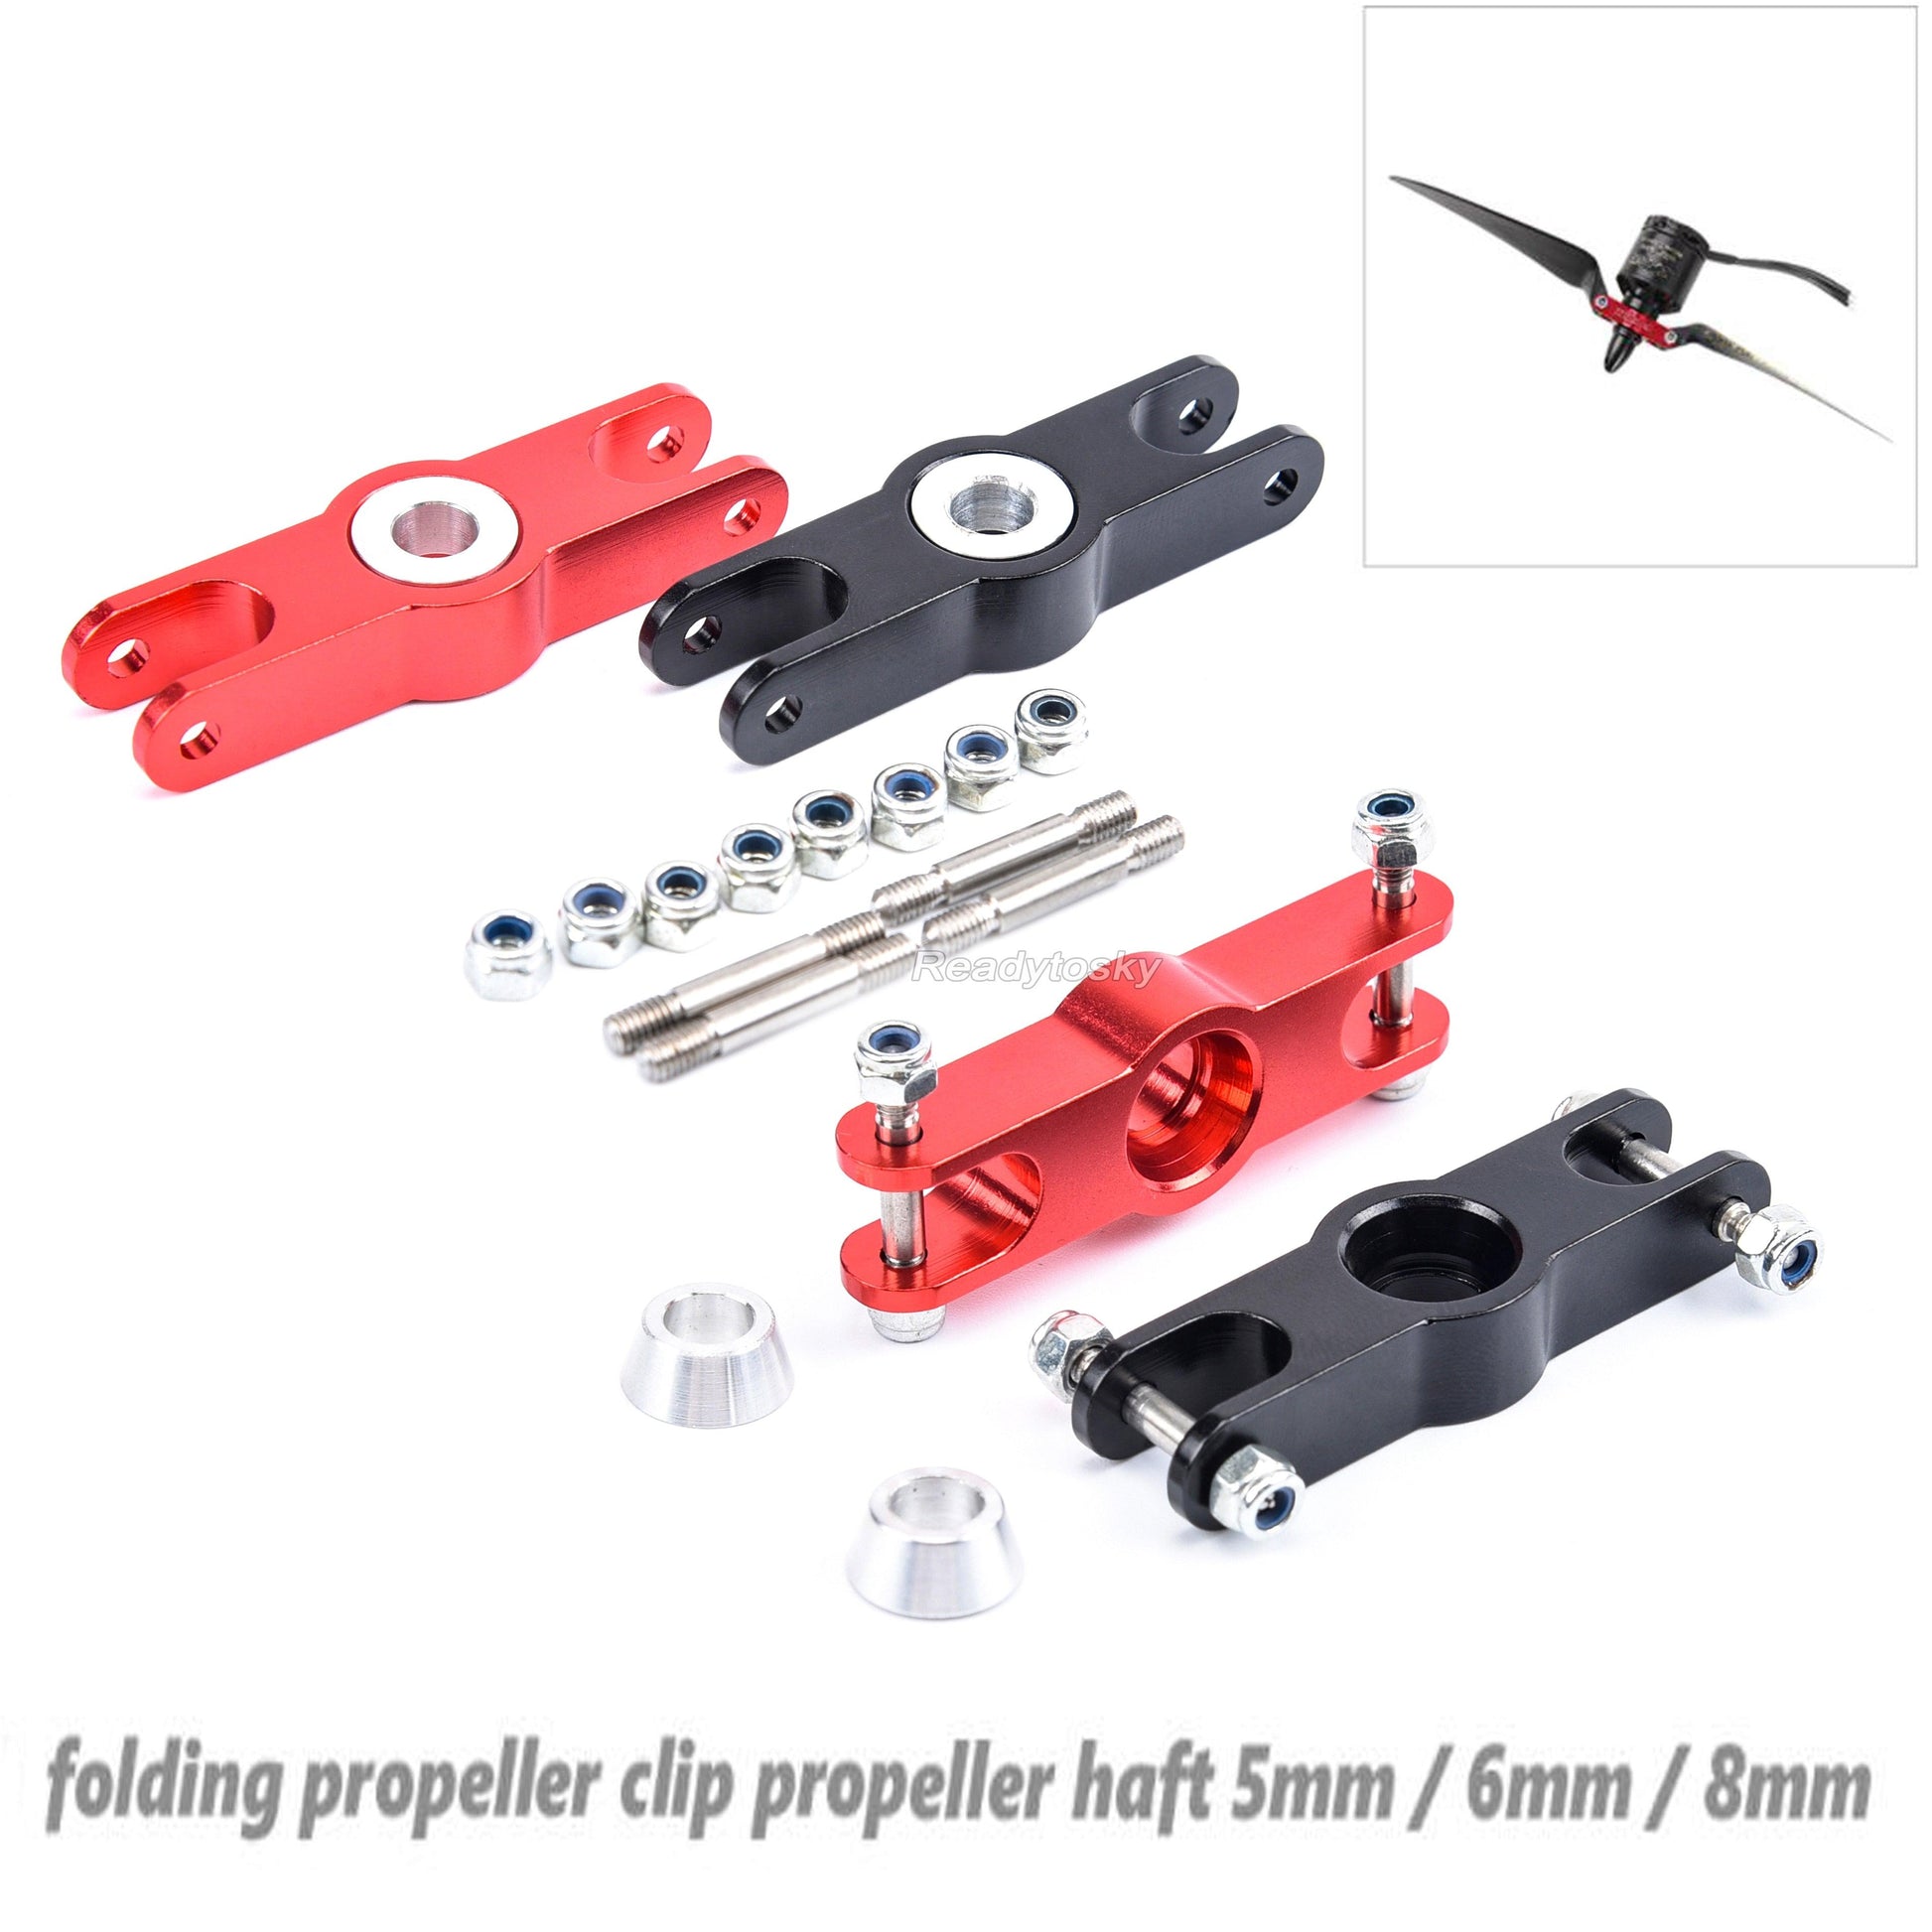 Propeller Clip - 1PCS Folding Propeller Clip 5MM/6MM/8MM Props Adapter Thread Blade Shaft for RC Airplane Racing Drone Fixed-wing DIY Accessories - RCDrone